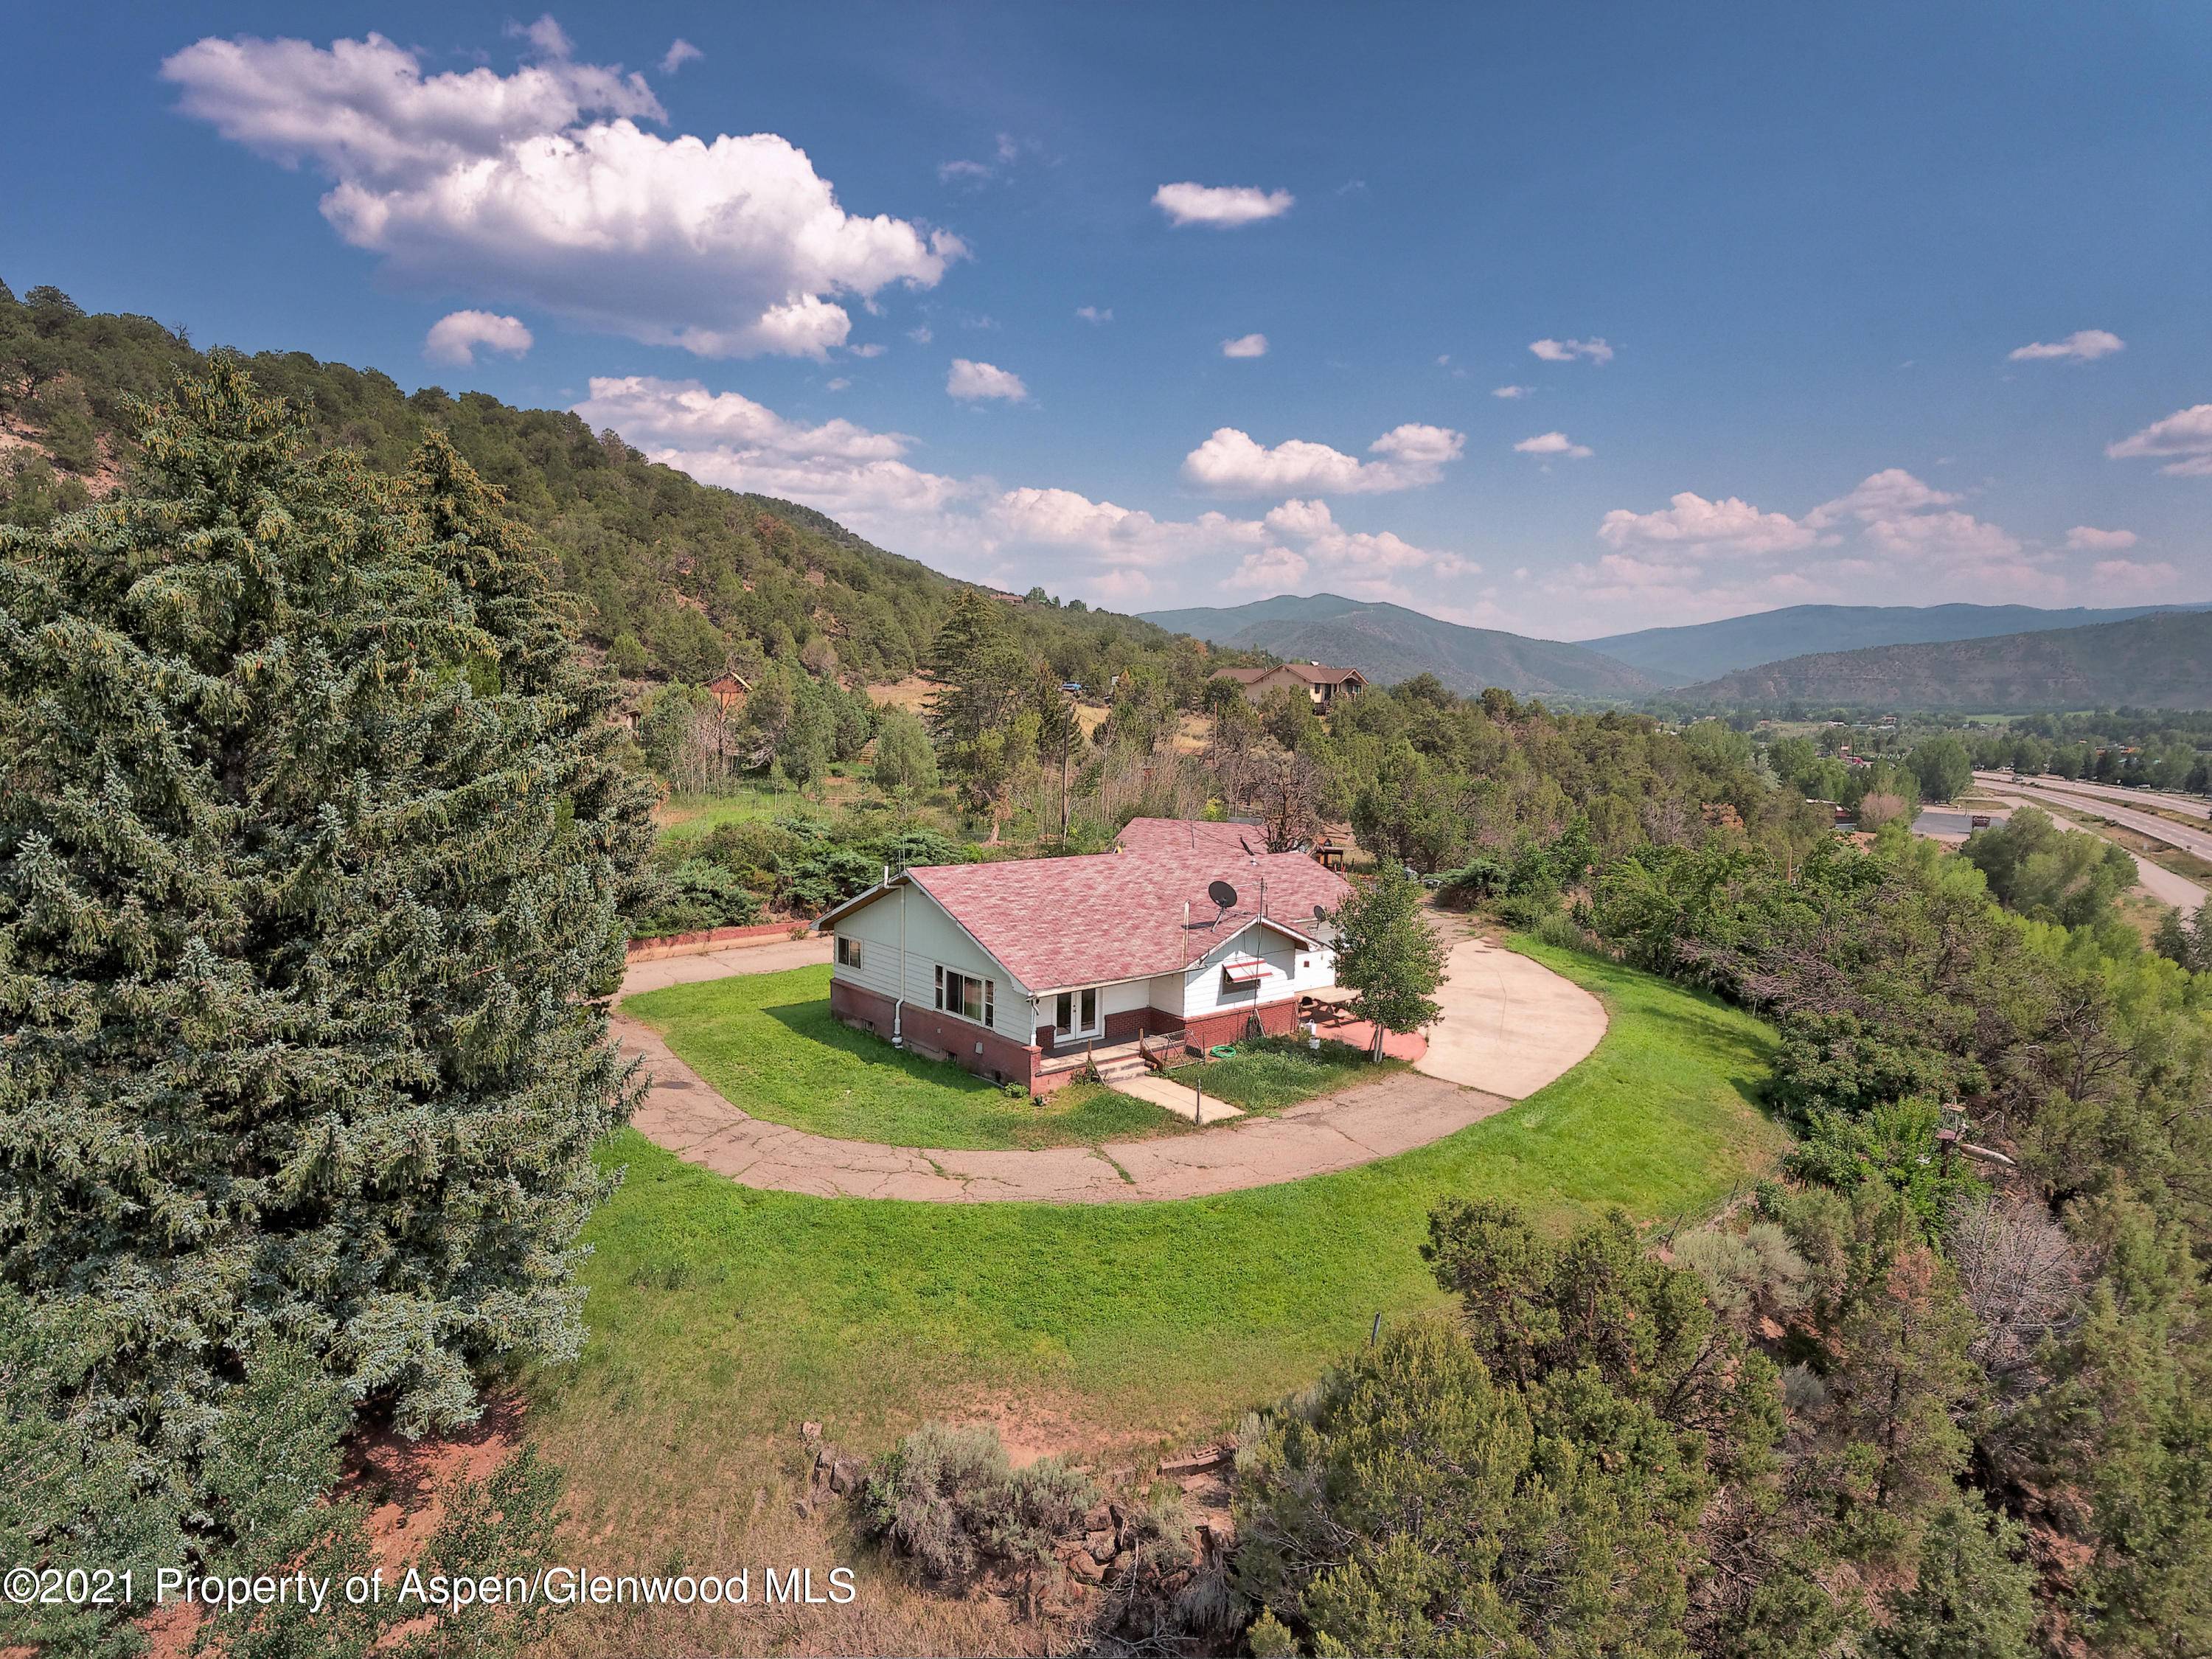 Boasting views up and down the valley, this home on the hill is poised with potential.